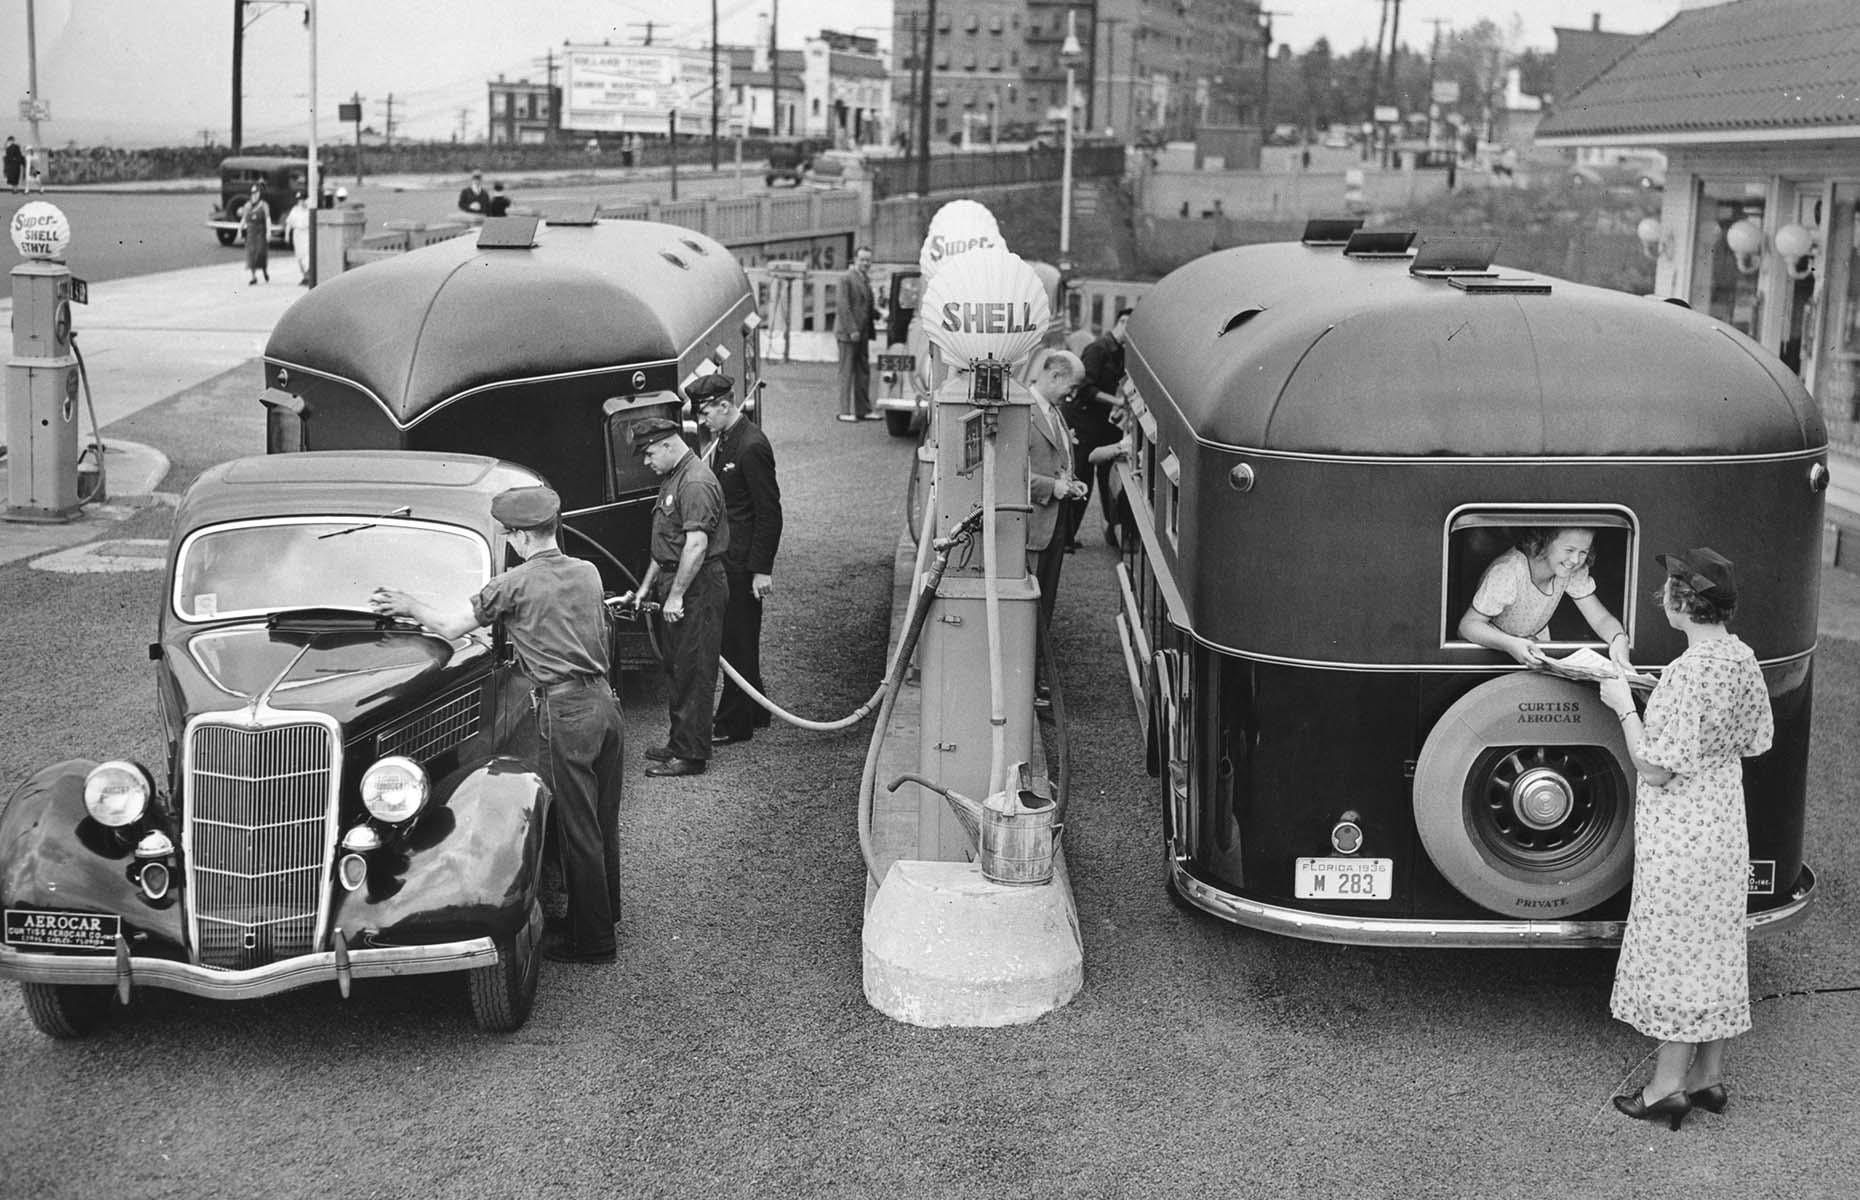 Through the 1930s, the Great Depression slowed the pace of America's automobile boom – but you'd still spot newfangled trailers, touring cars or makeshift RVs on US highways. Here a pair of gleaming vehicles pulling Curtiss Aerocars fill up at a gas station in New Jersey.